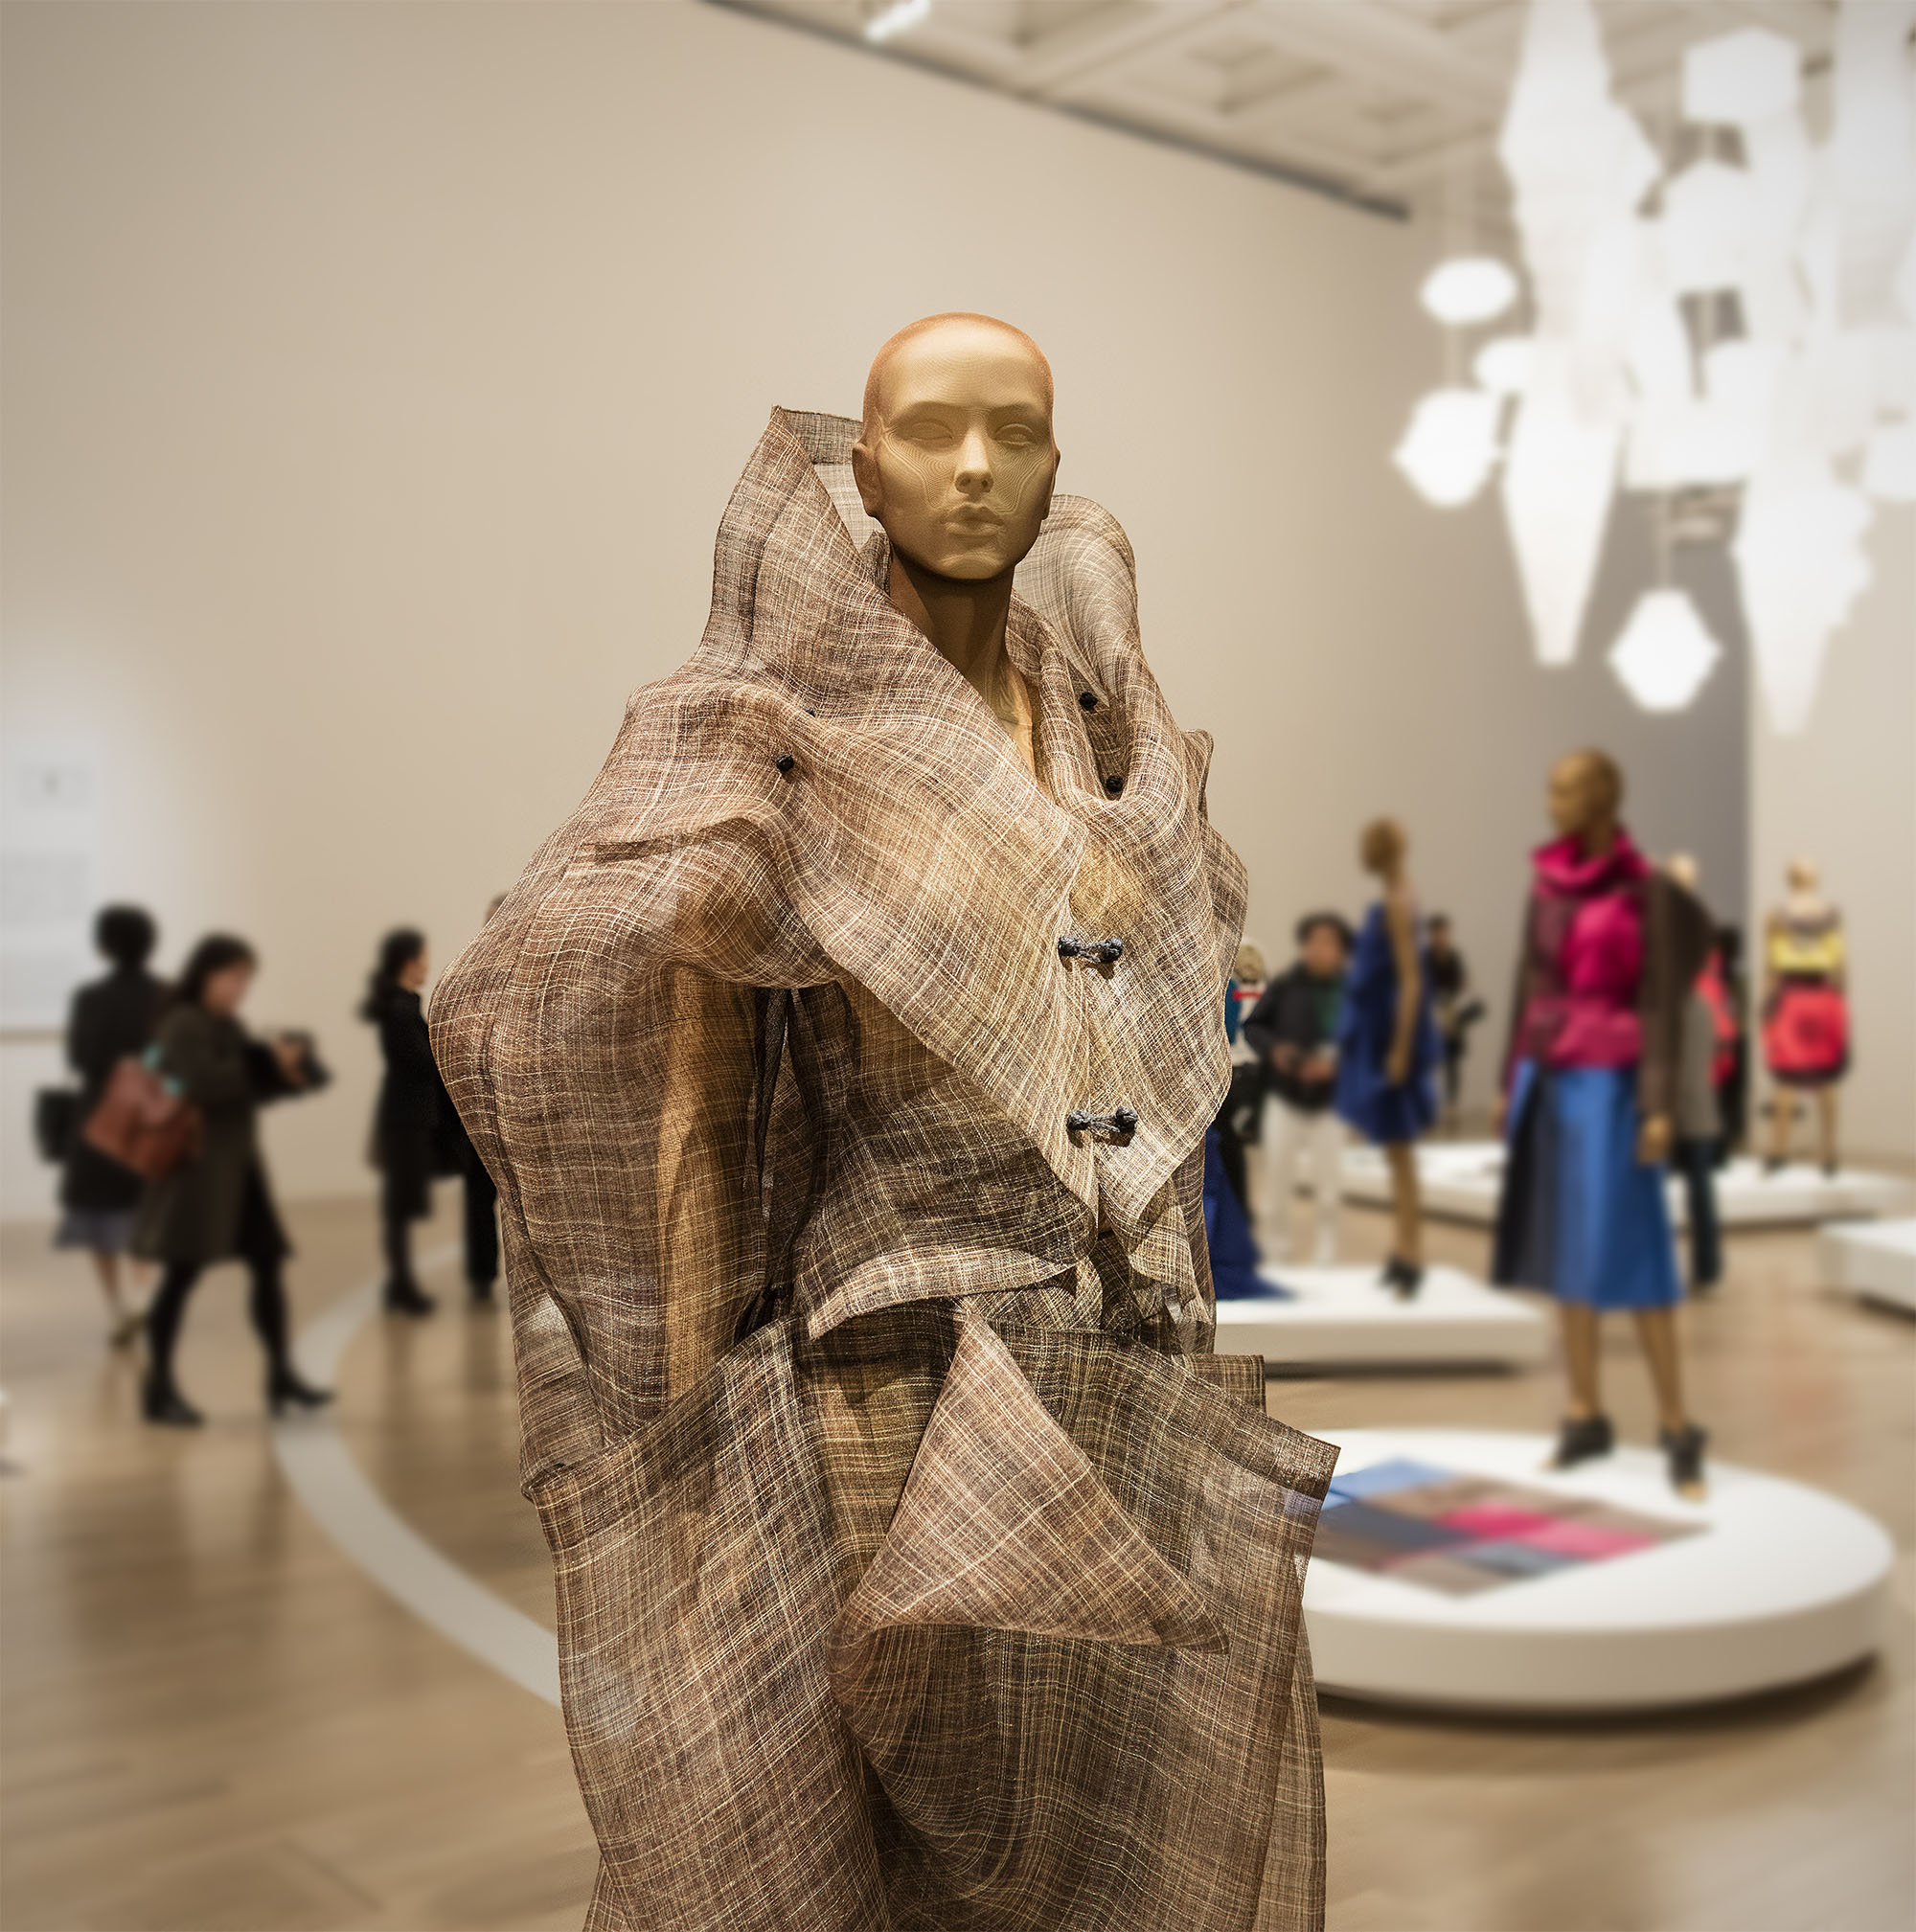 Issey Miyake invites us to see his material world | The Japan Times